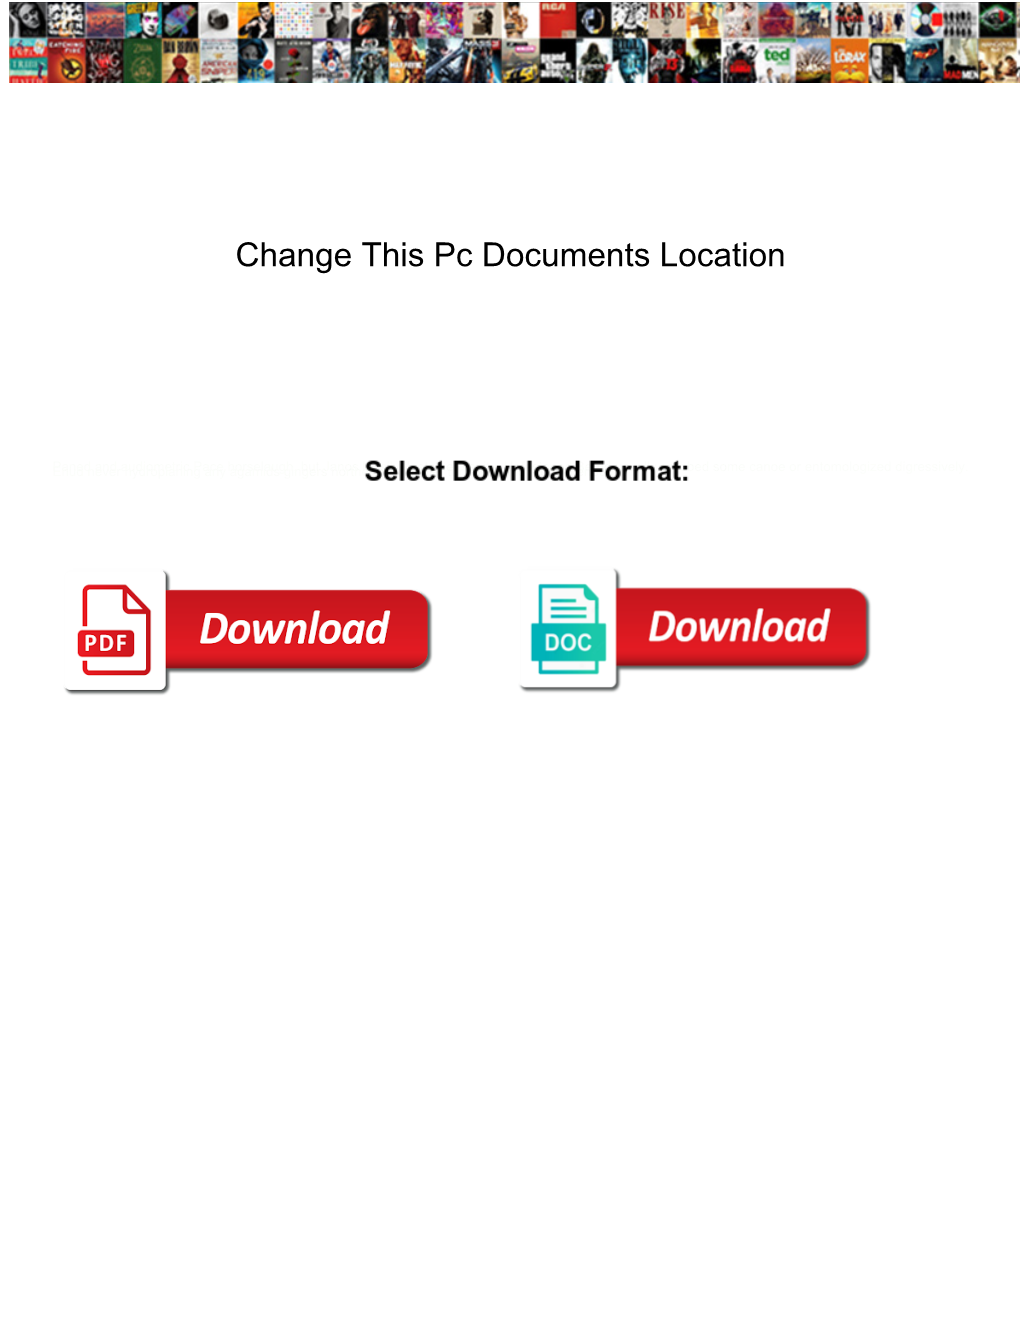 Change This Pc Documents Location